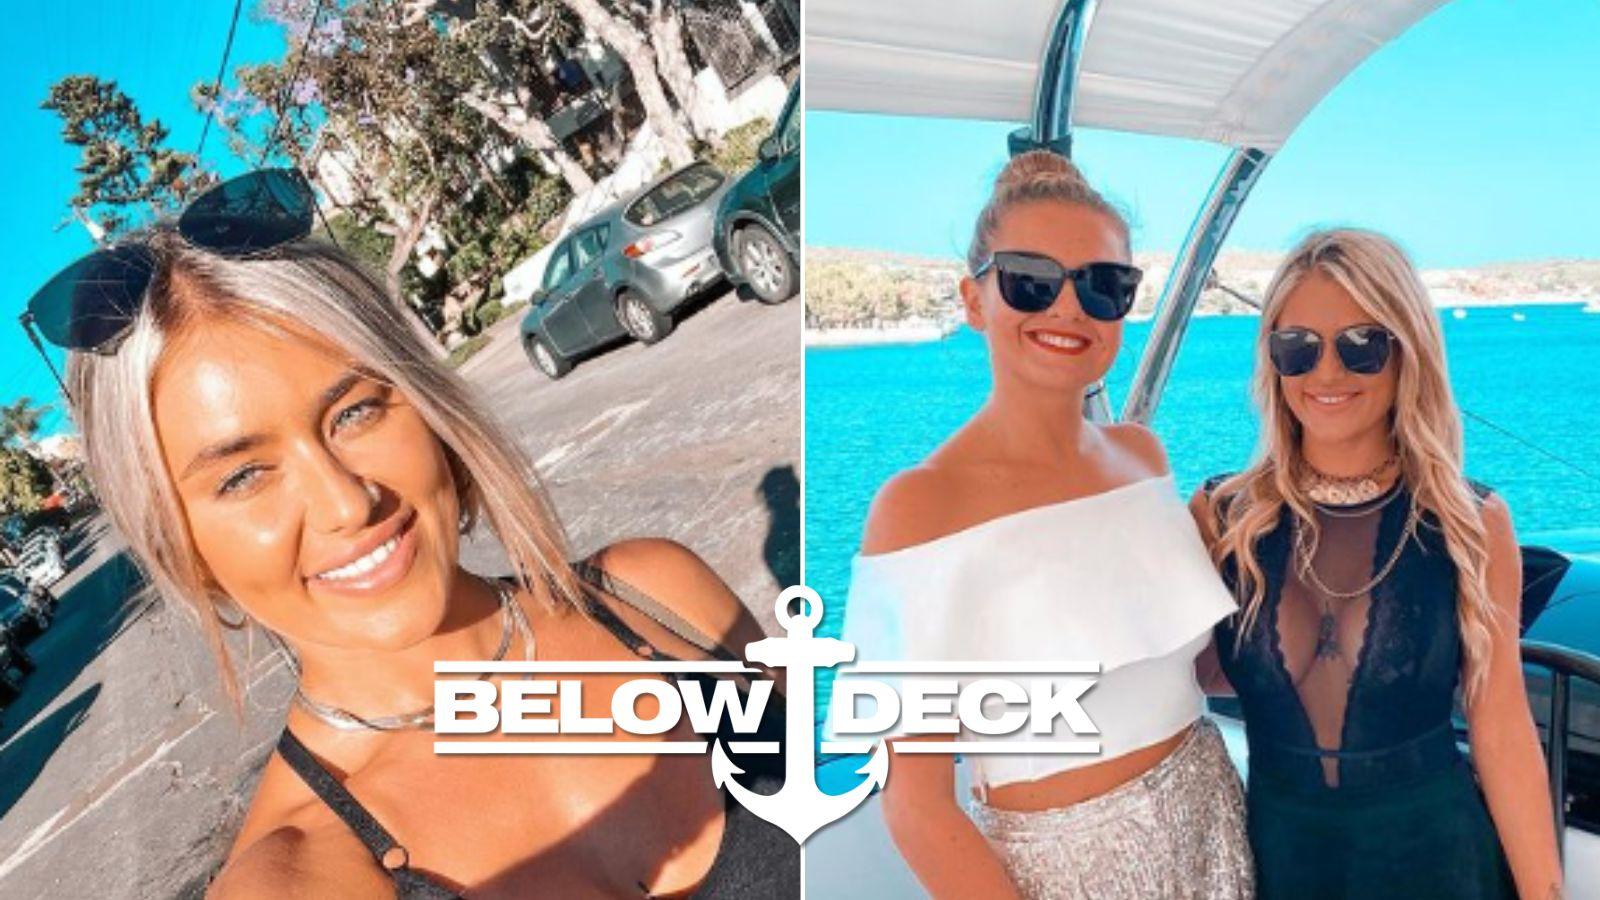 Daisy and Scarlett from Below Deck Sailing Yacht